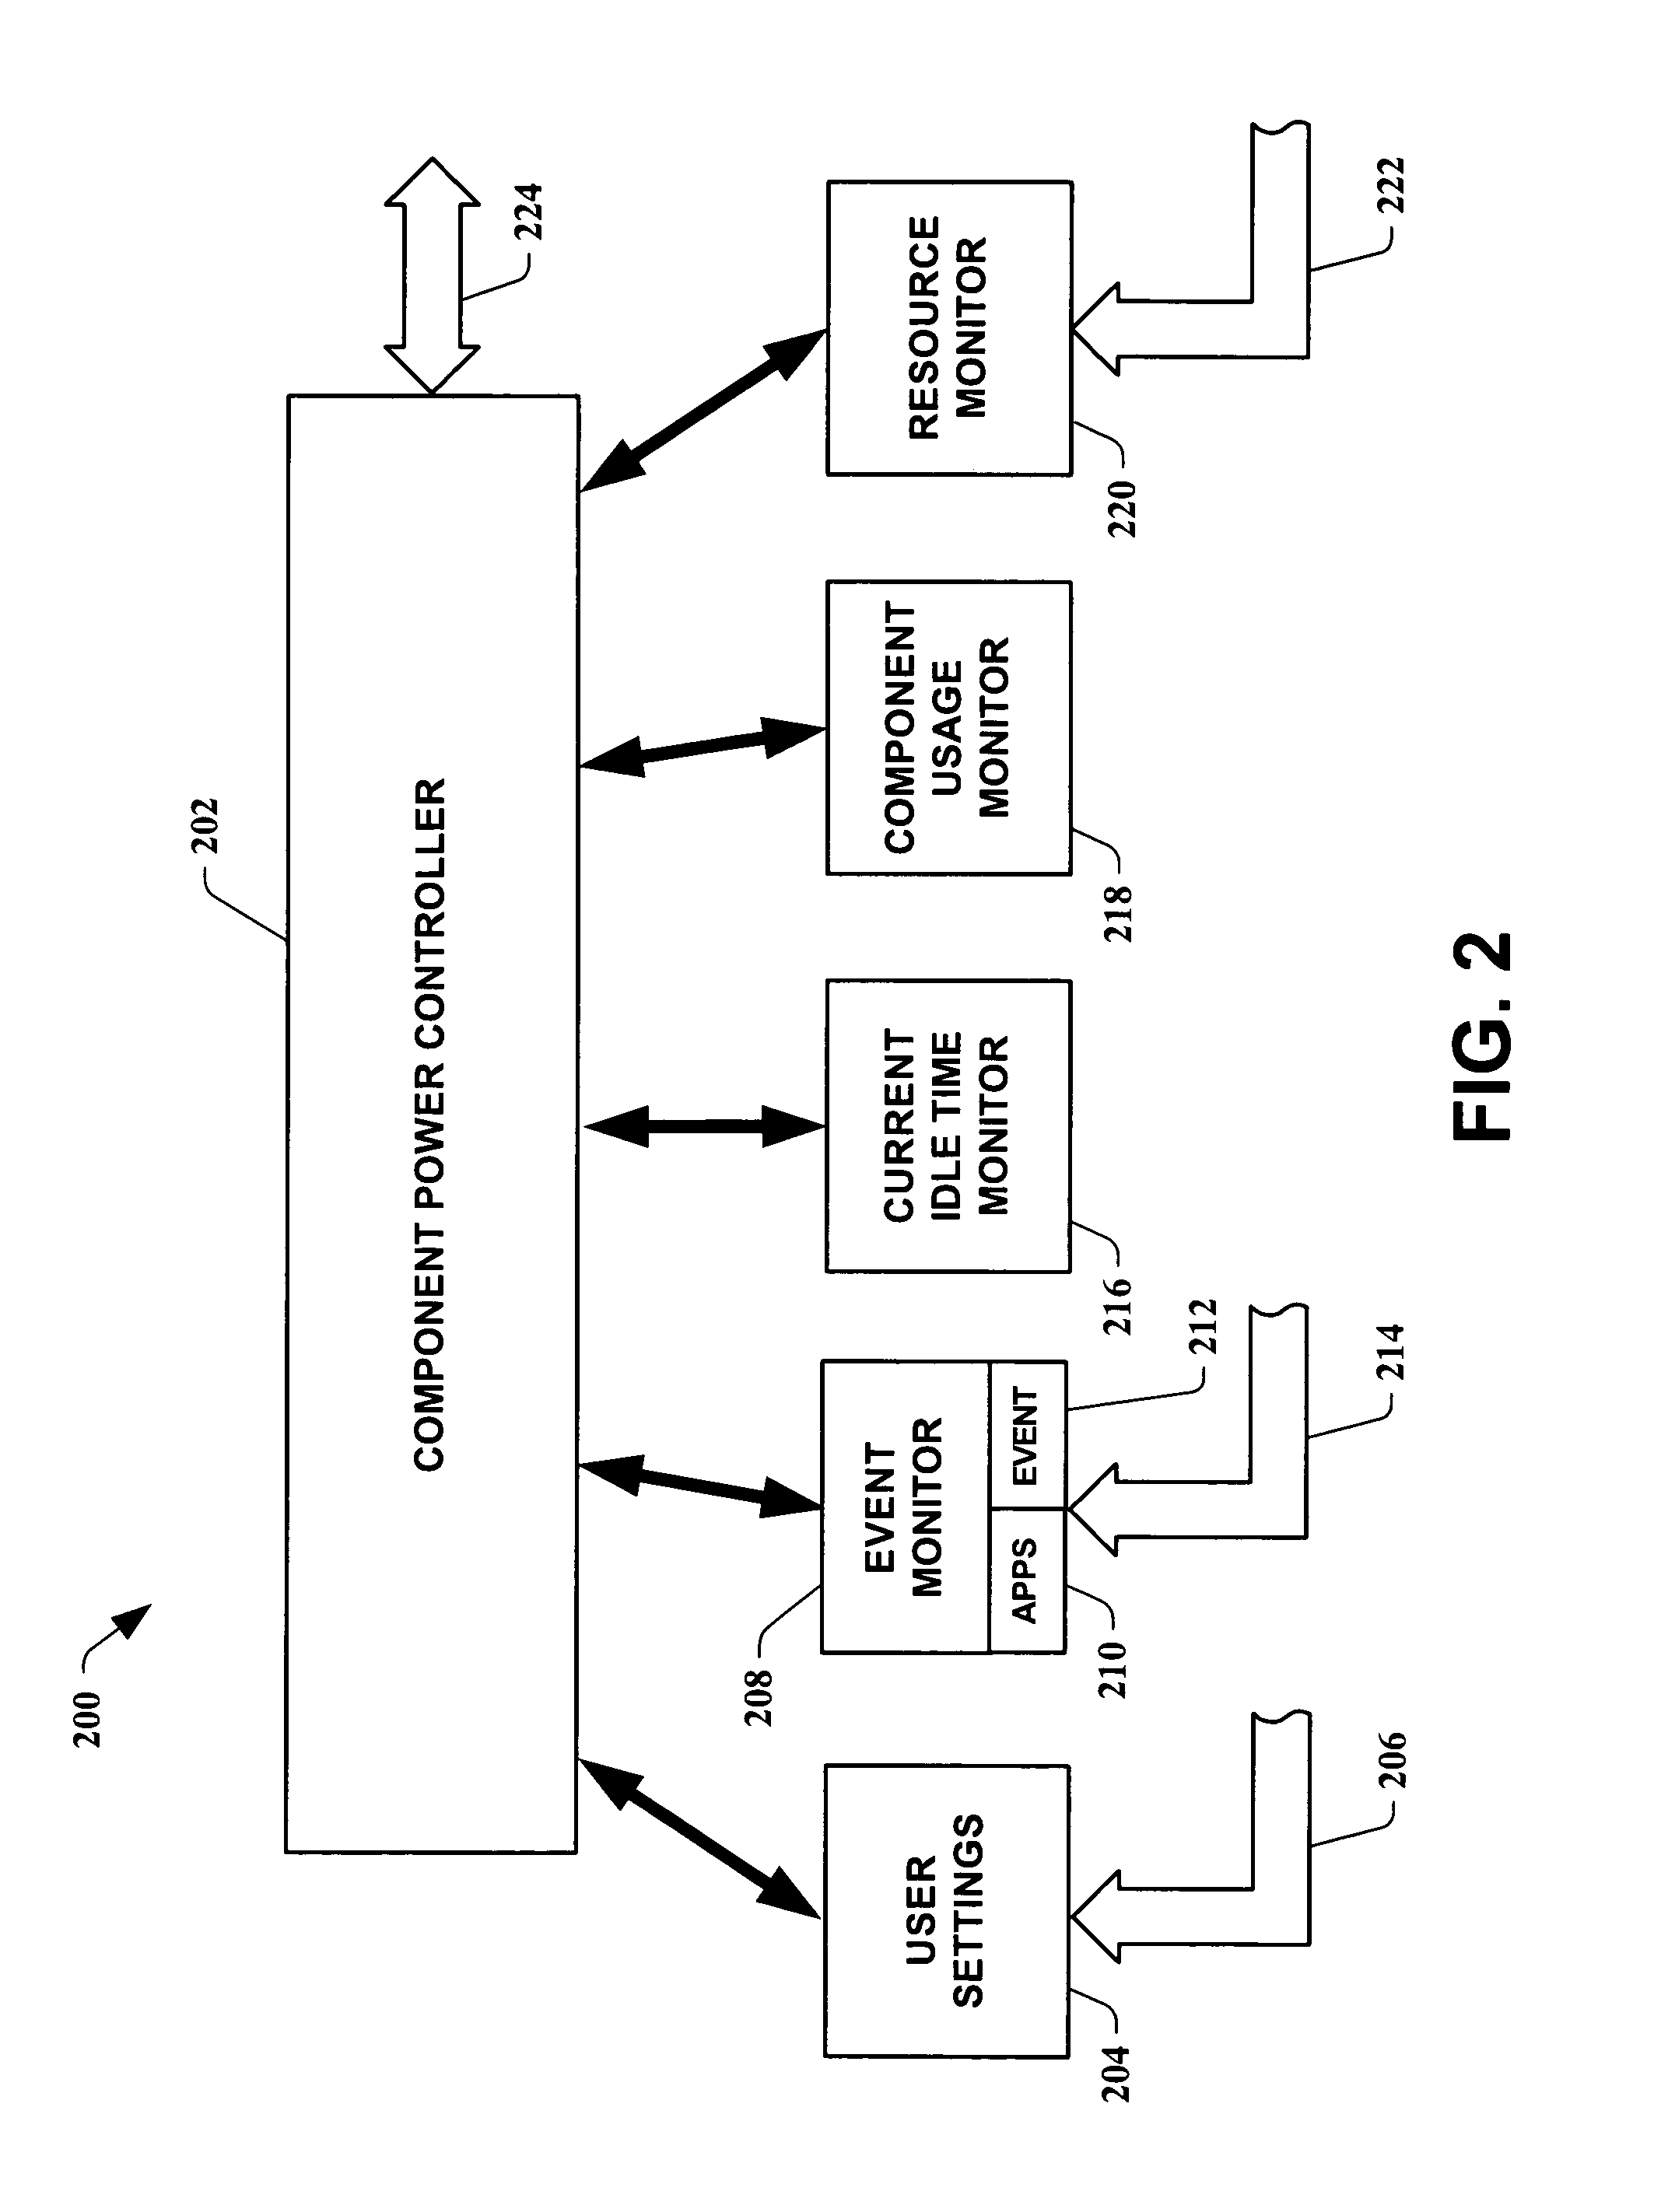 Dynamic power control apparatus, systems and methods